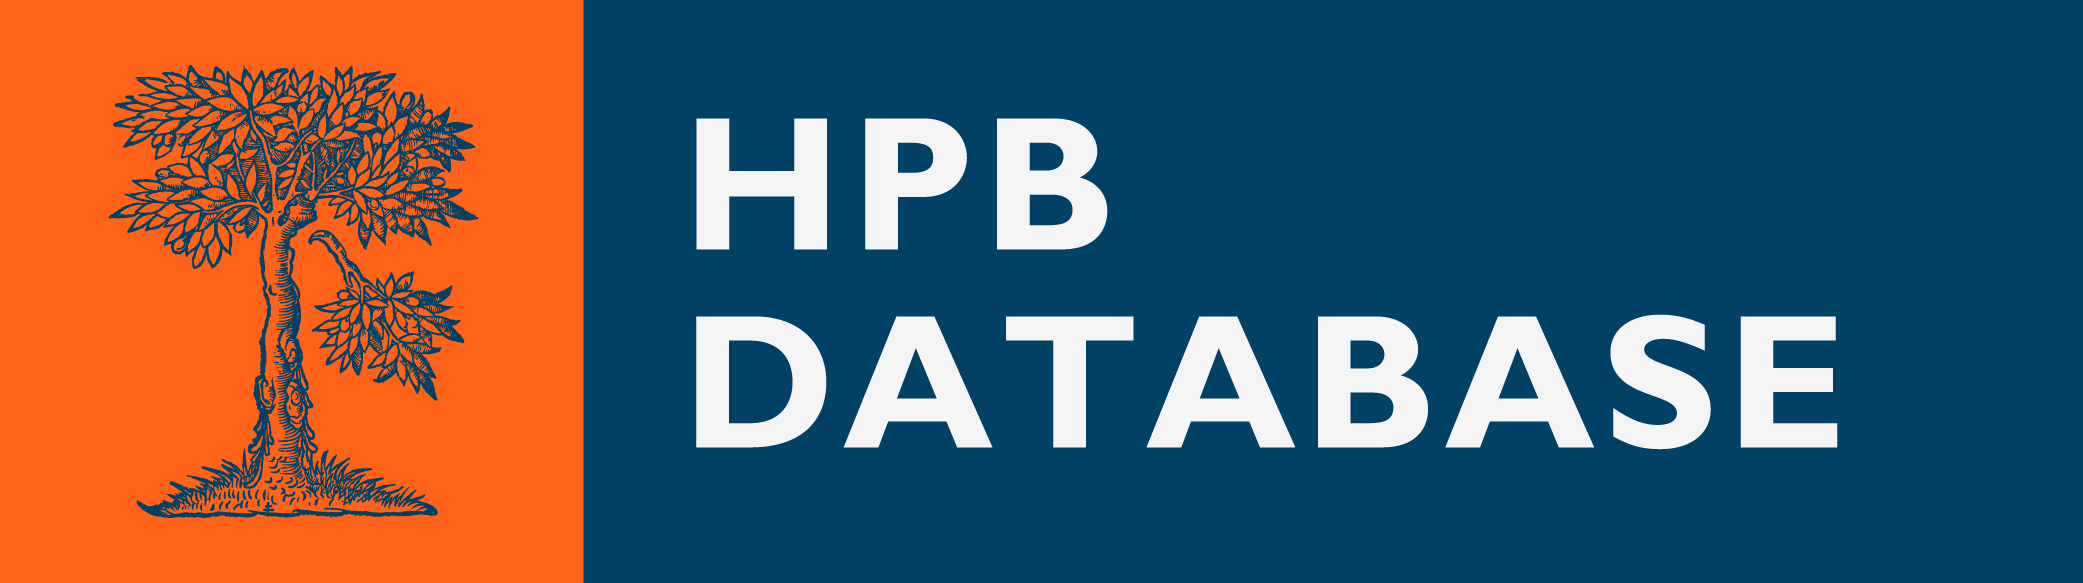 Search the HPB